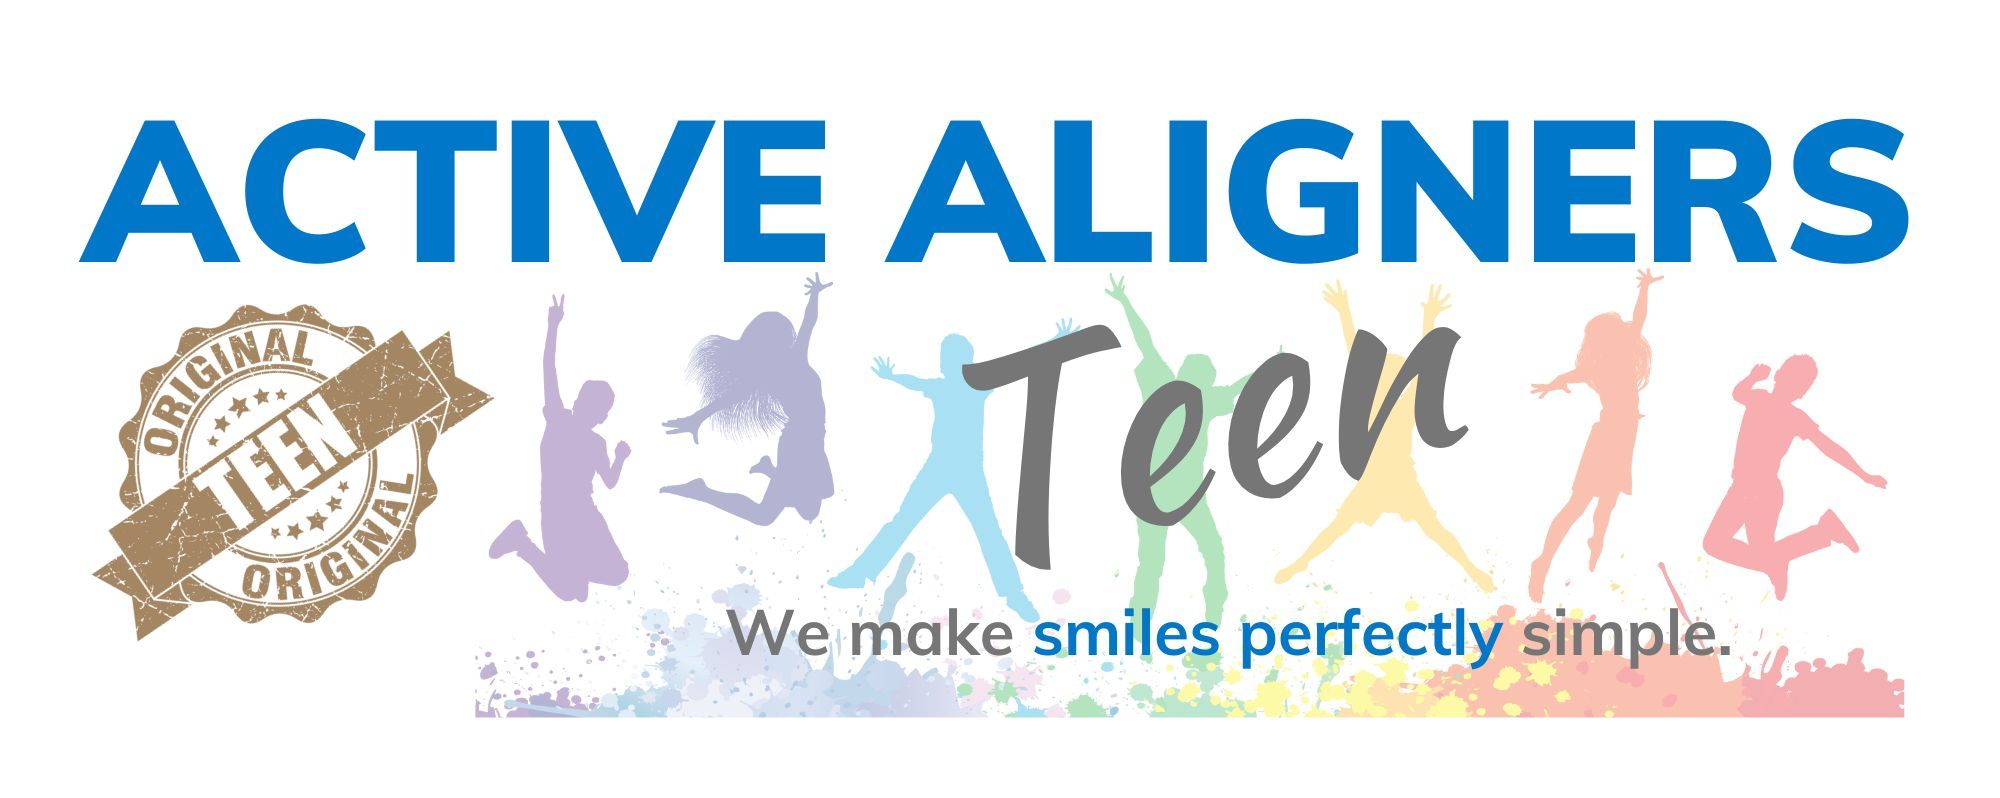 Active Aligners perfect for teens